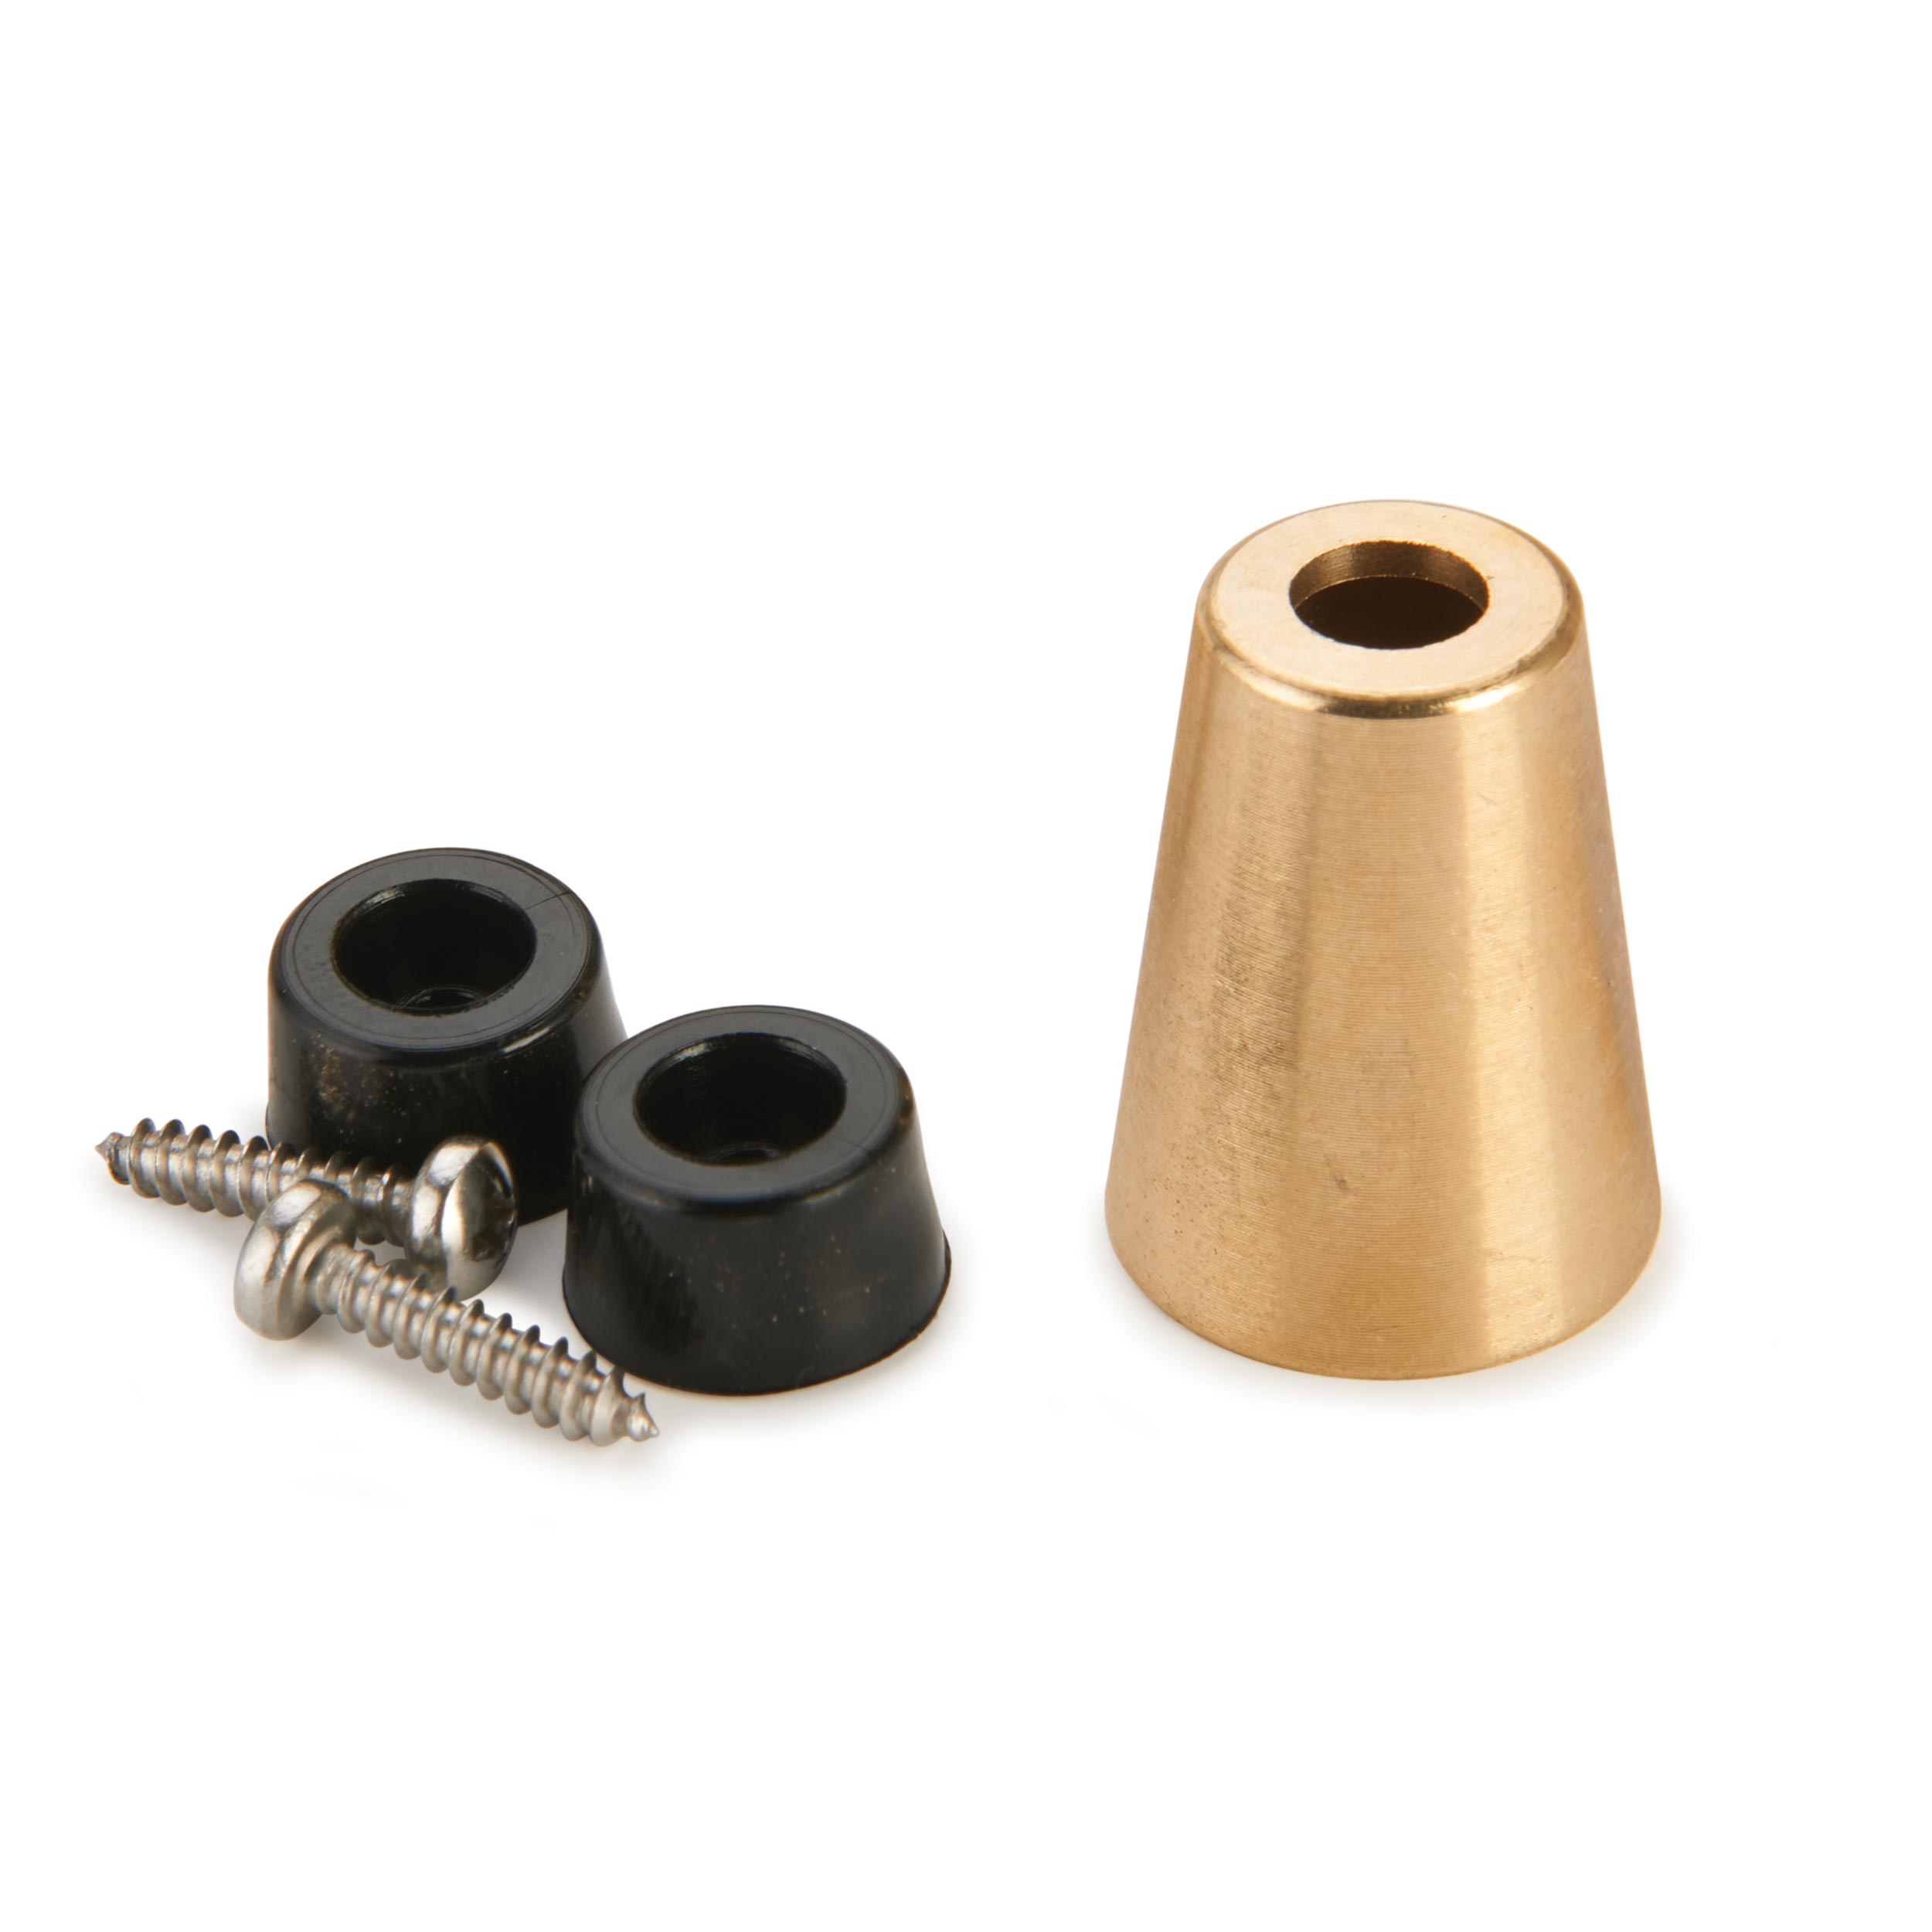 Woodriver Brass Cane Foot Hardware